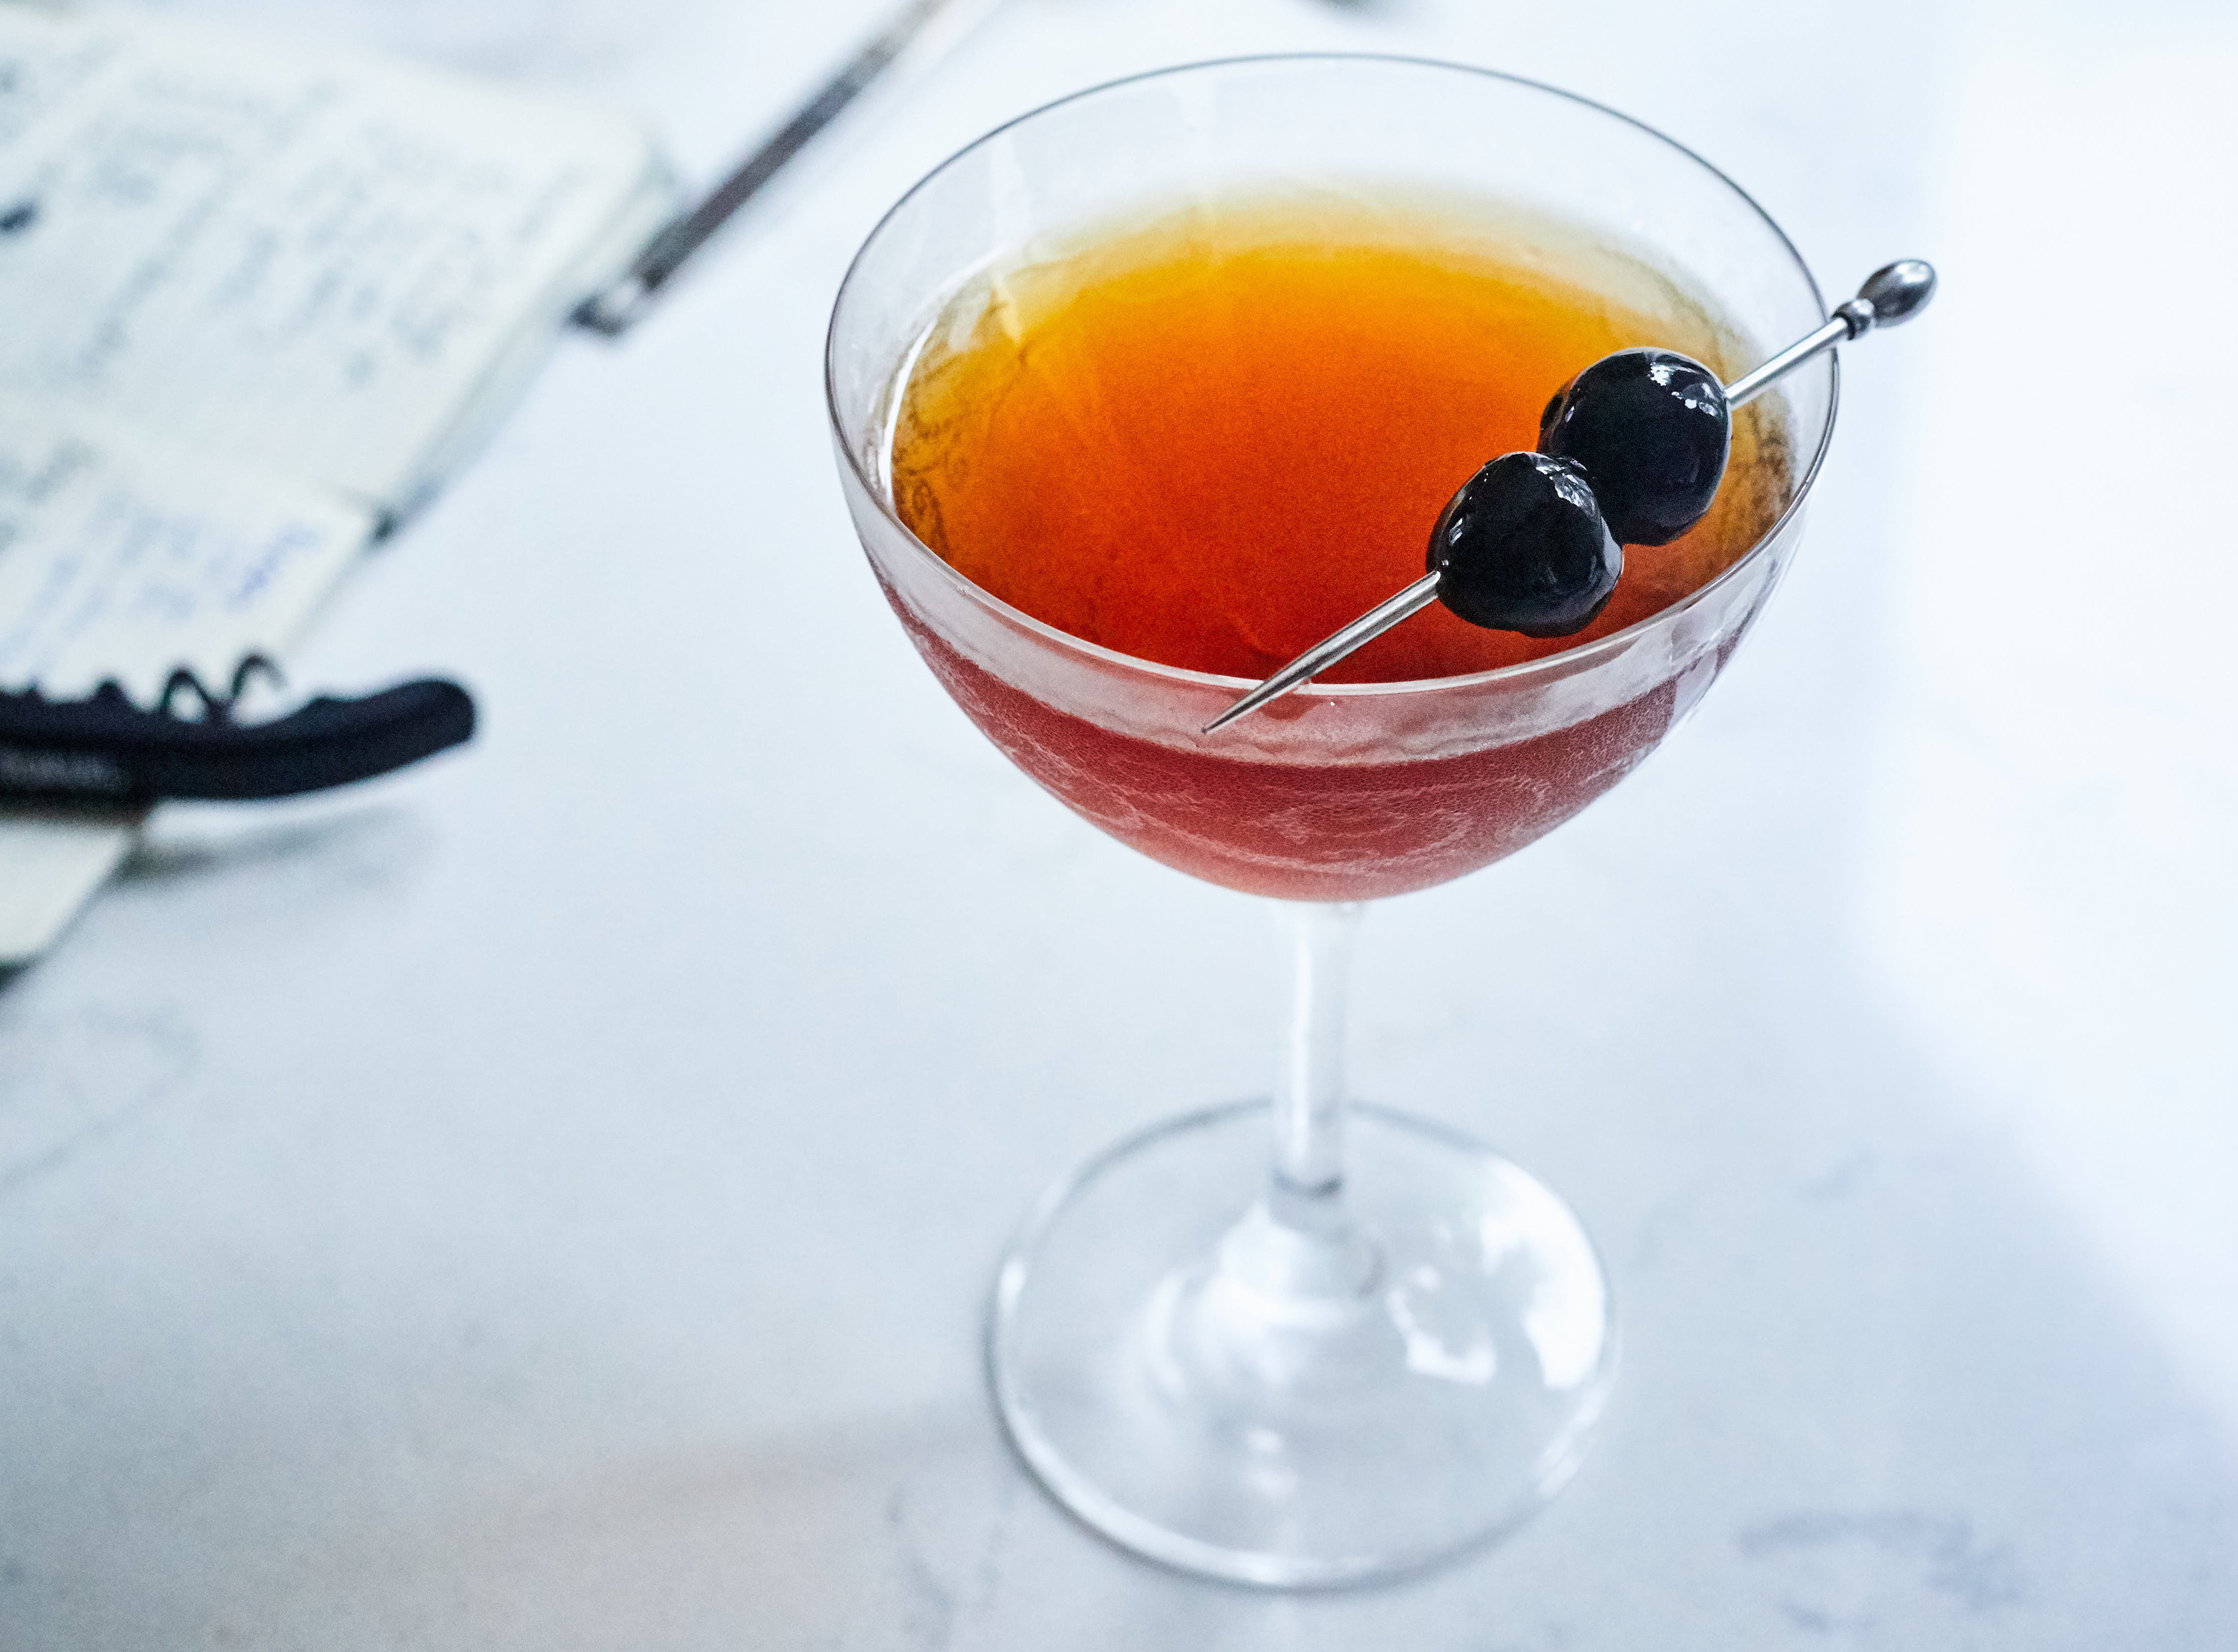 The Perfect Manhattan. Photo credit: Peter Frank Edwards.